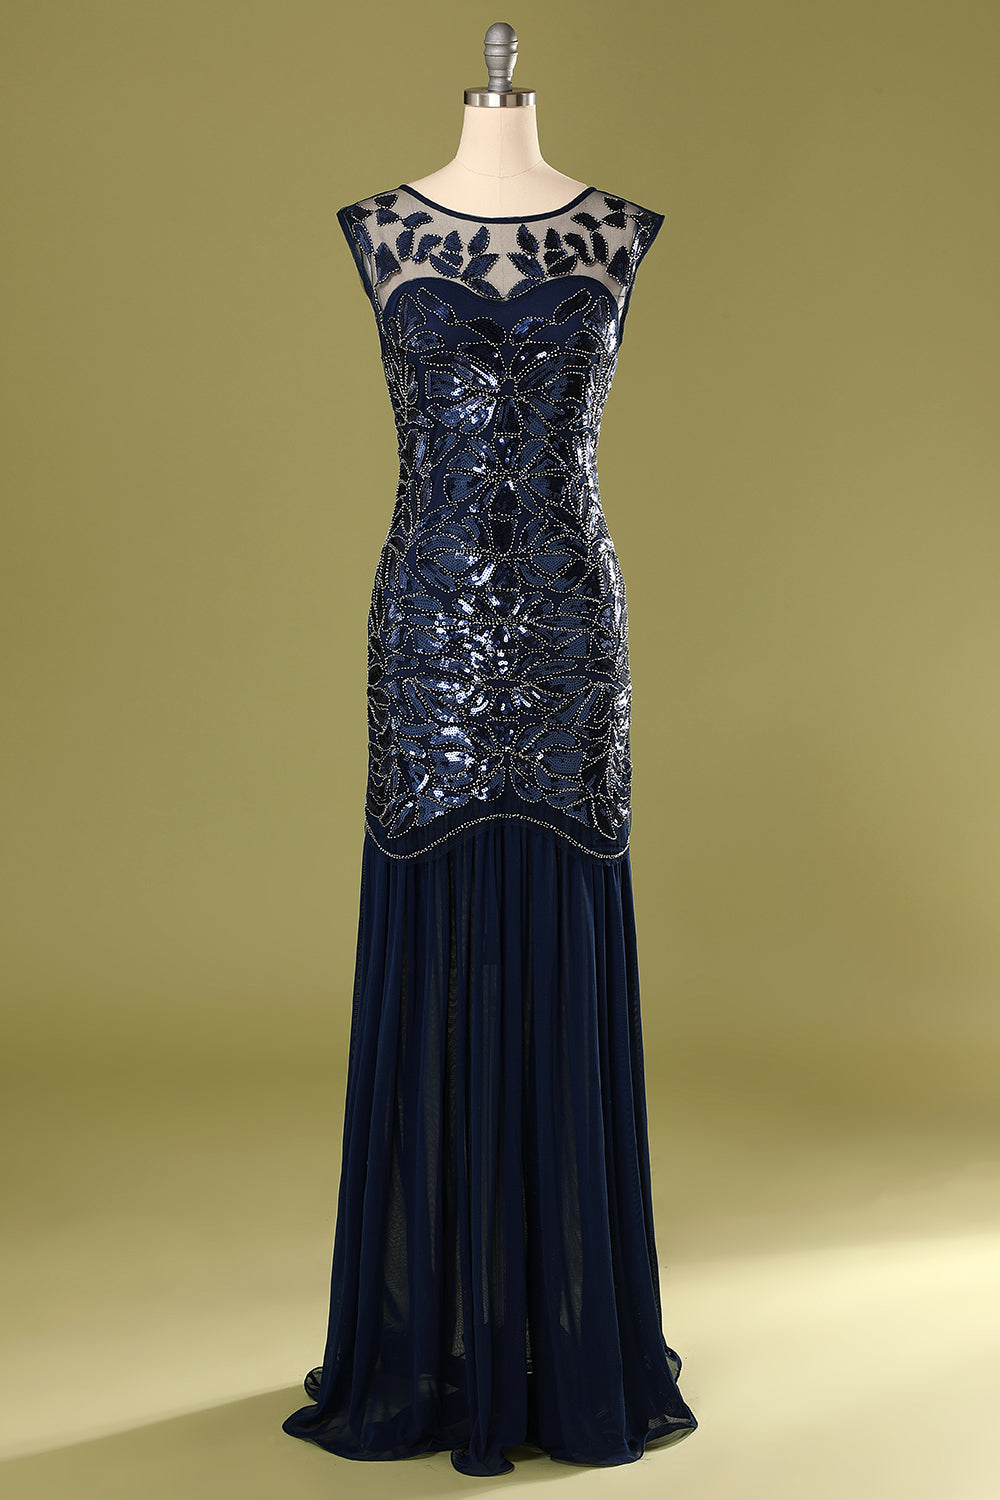 1920s Evening Gowns, Formal ☀ Evening ...